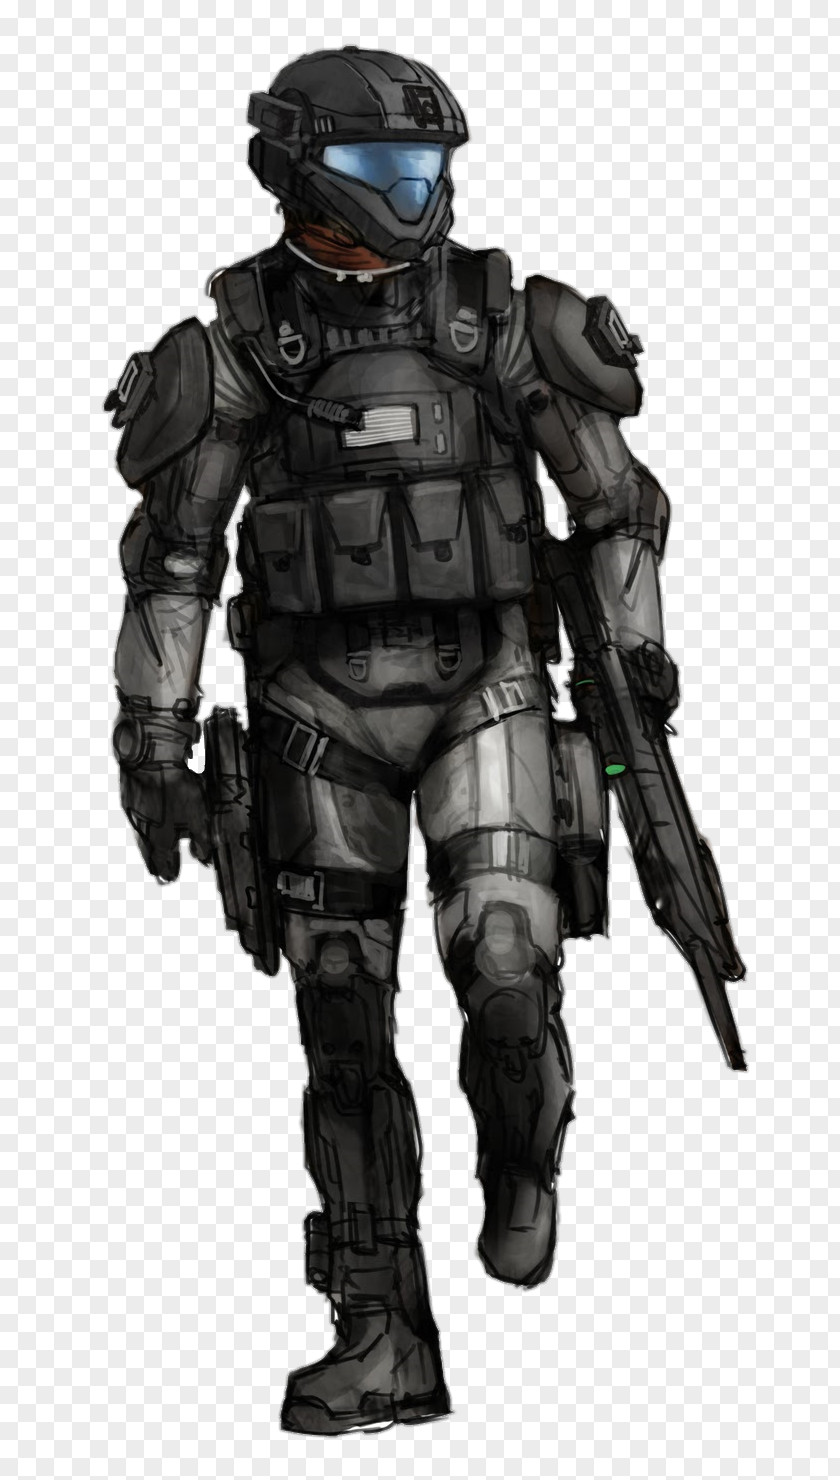 Halo 3: ODST Halo: Reach 4 Wars PNG